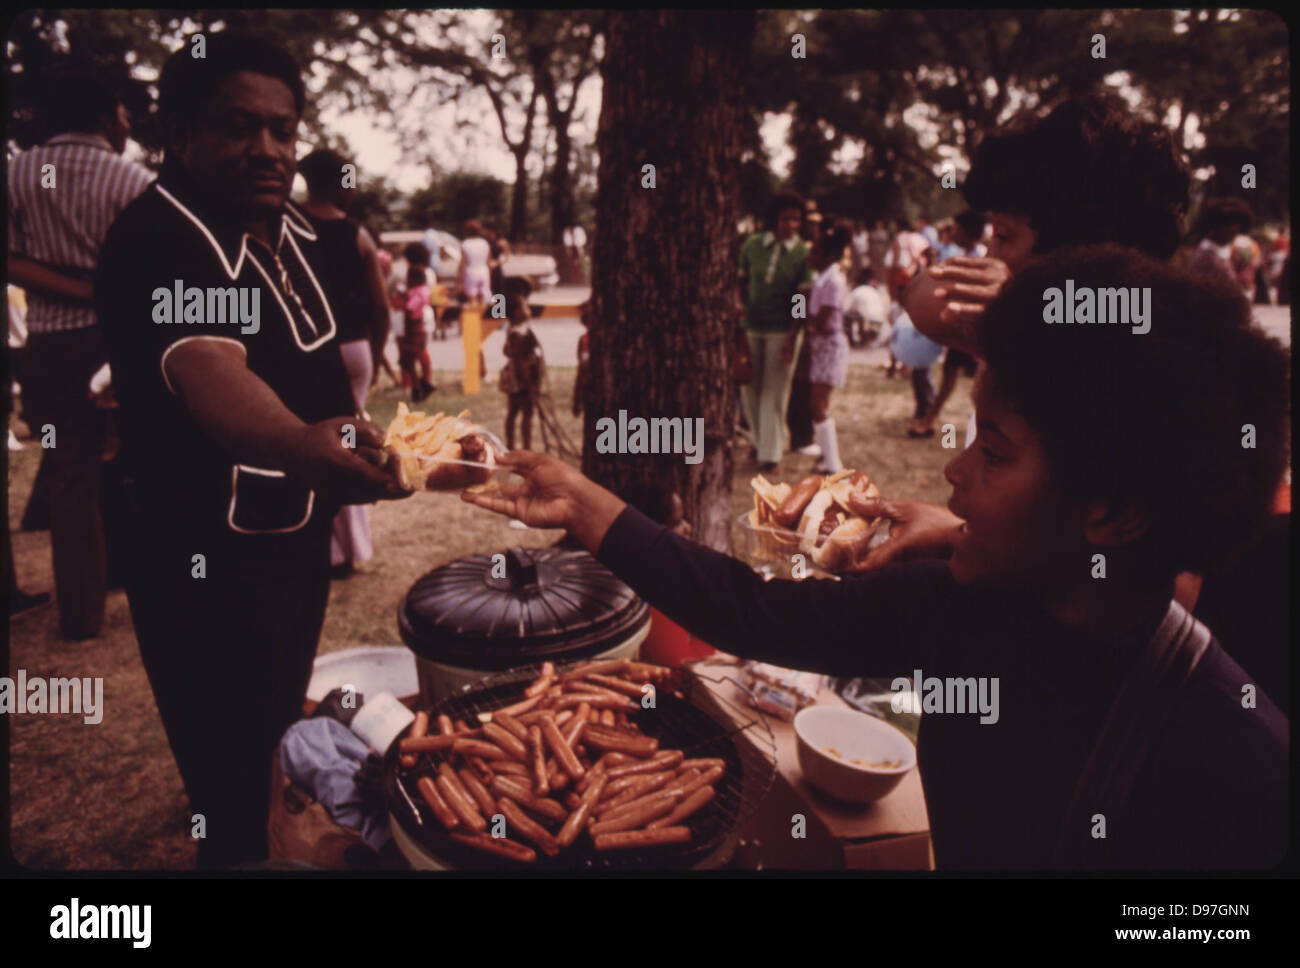 Washington Park On Chicago's South Side Where Many Black Families Enjoy Picnicking During The Summer, 07/1973 Stock Photo